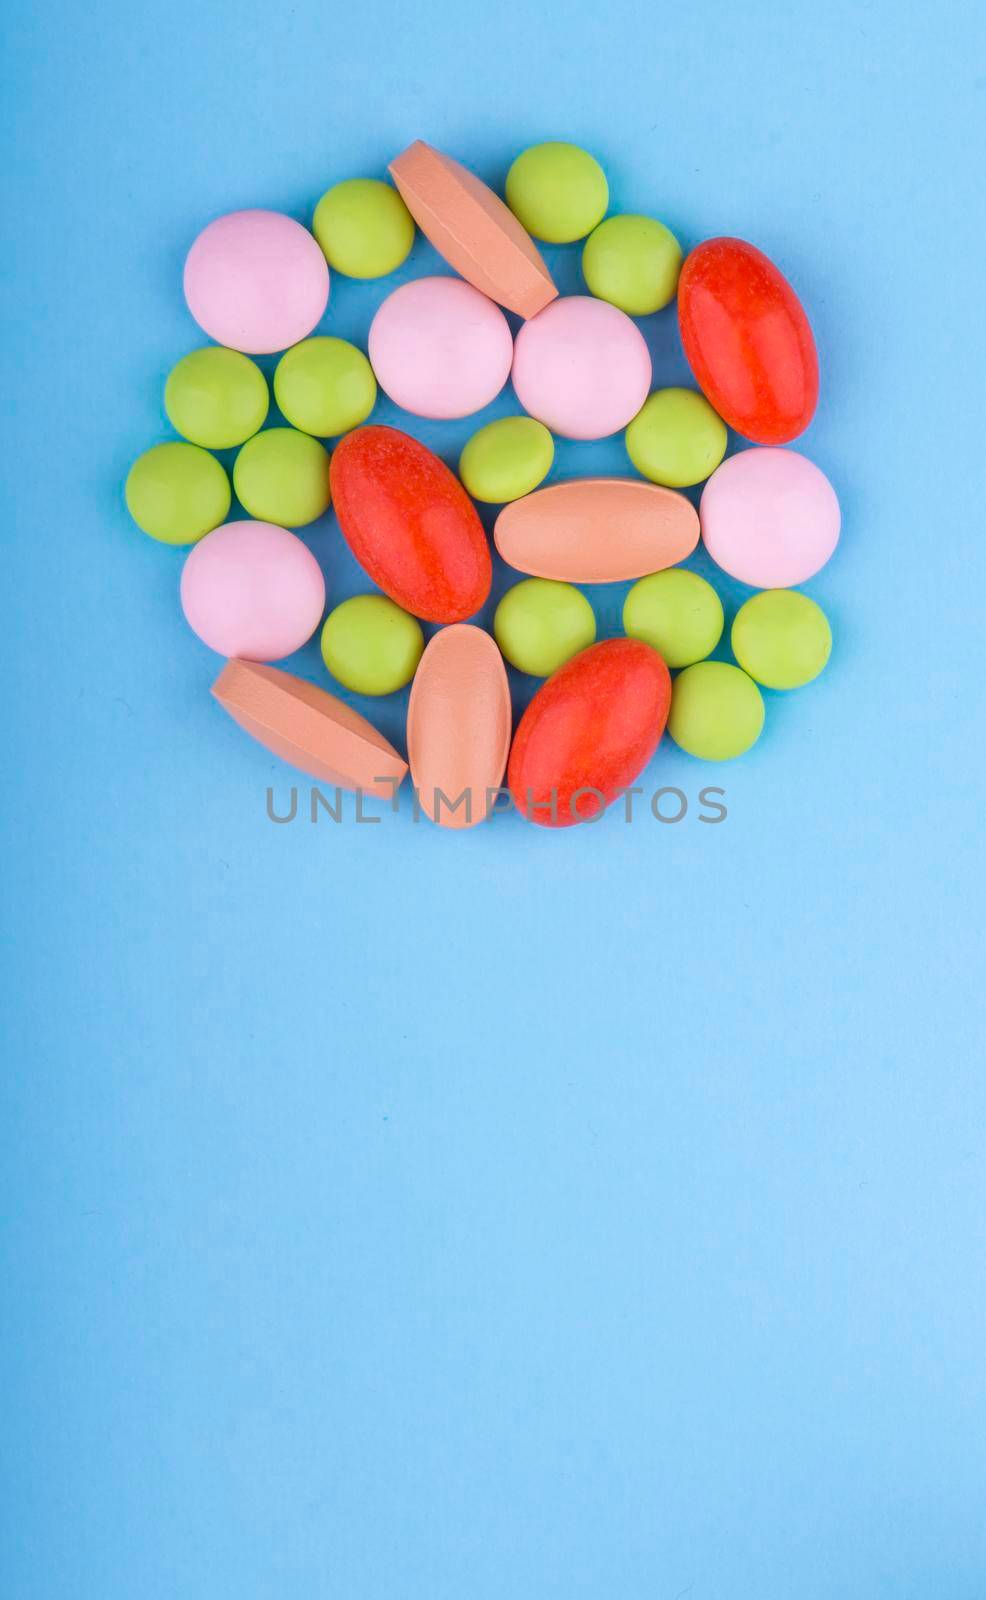 Colored pills, tablets and capsules on a blue background. Medicine and health. by aprilphoto